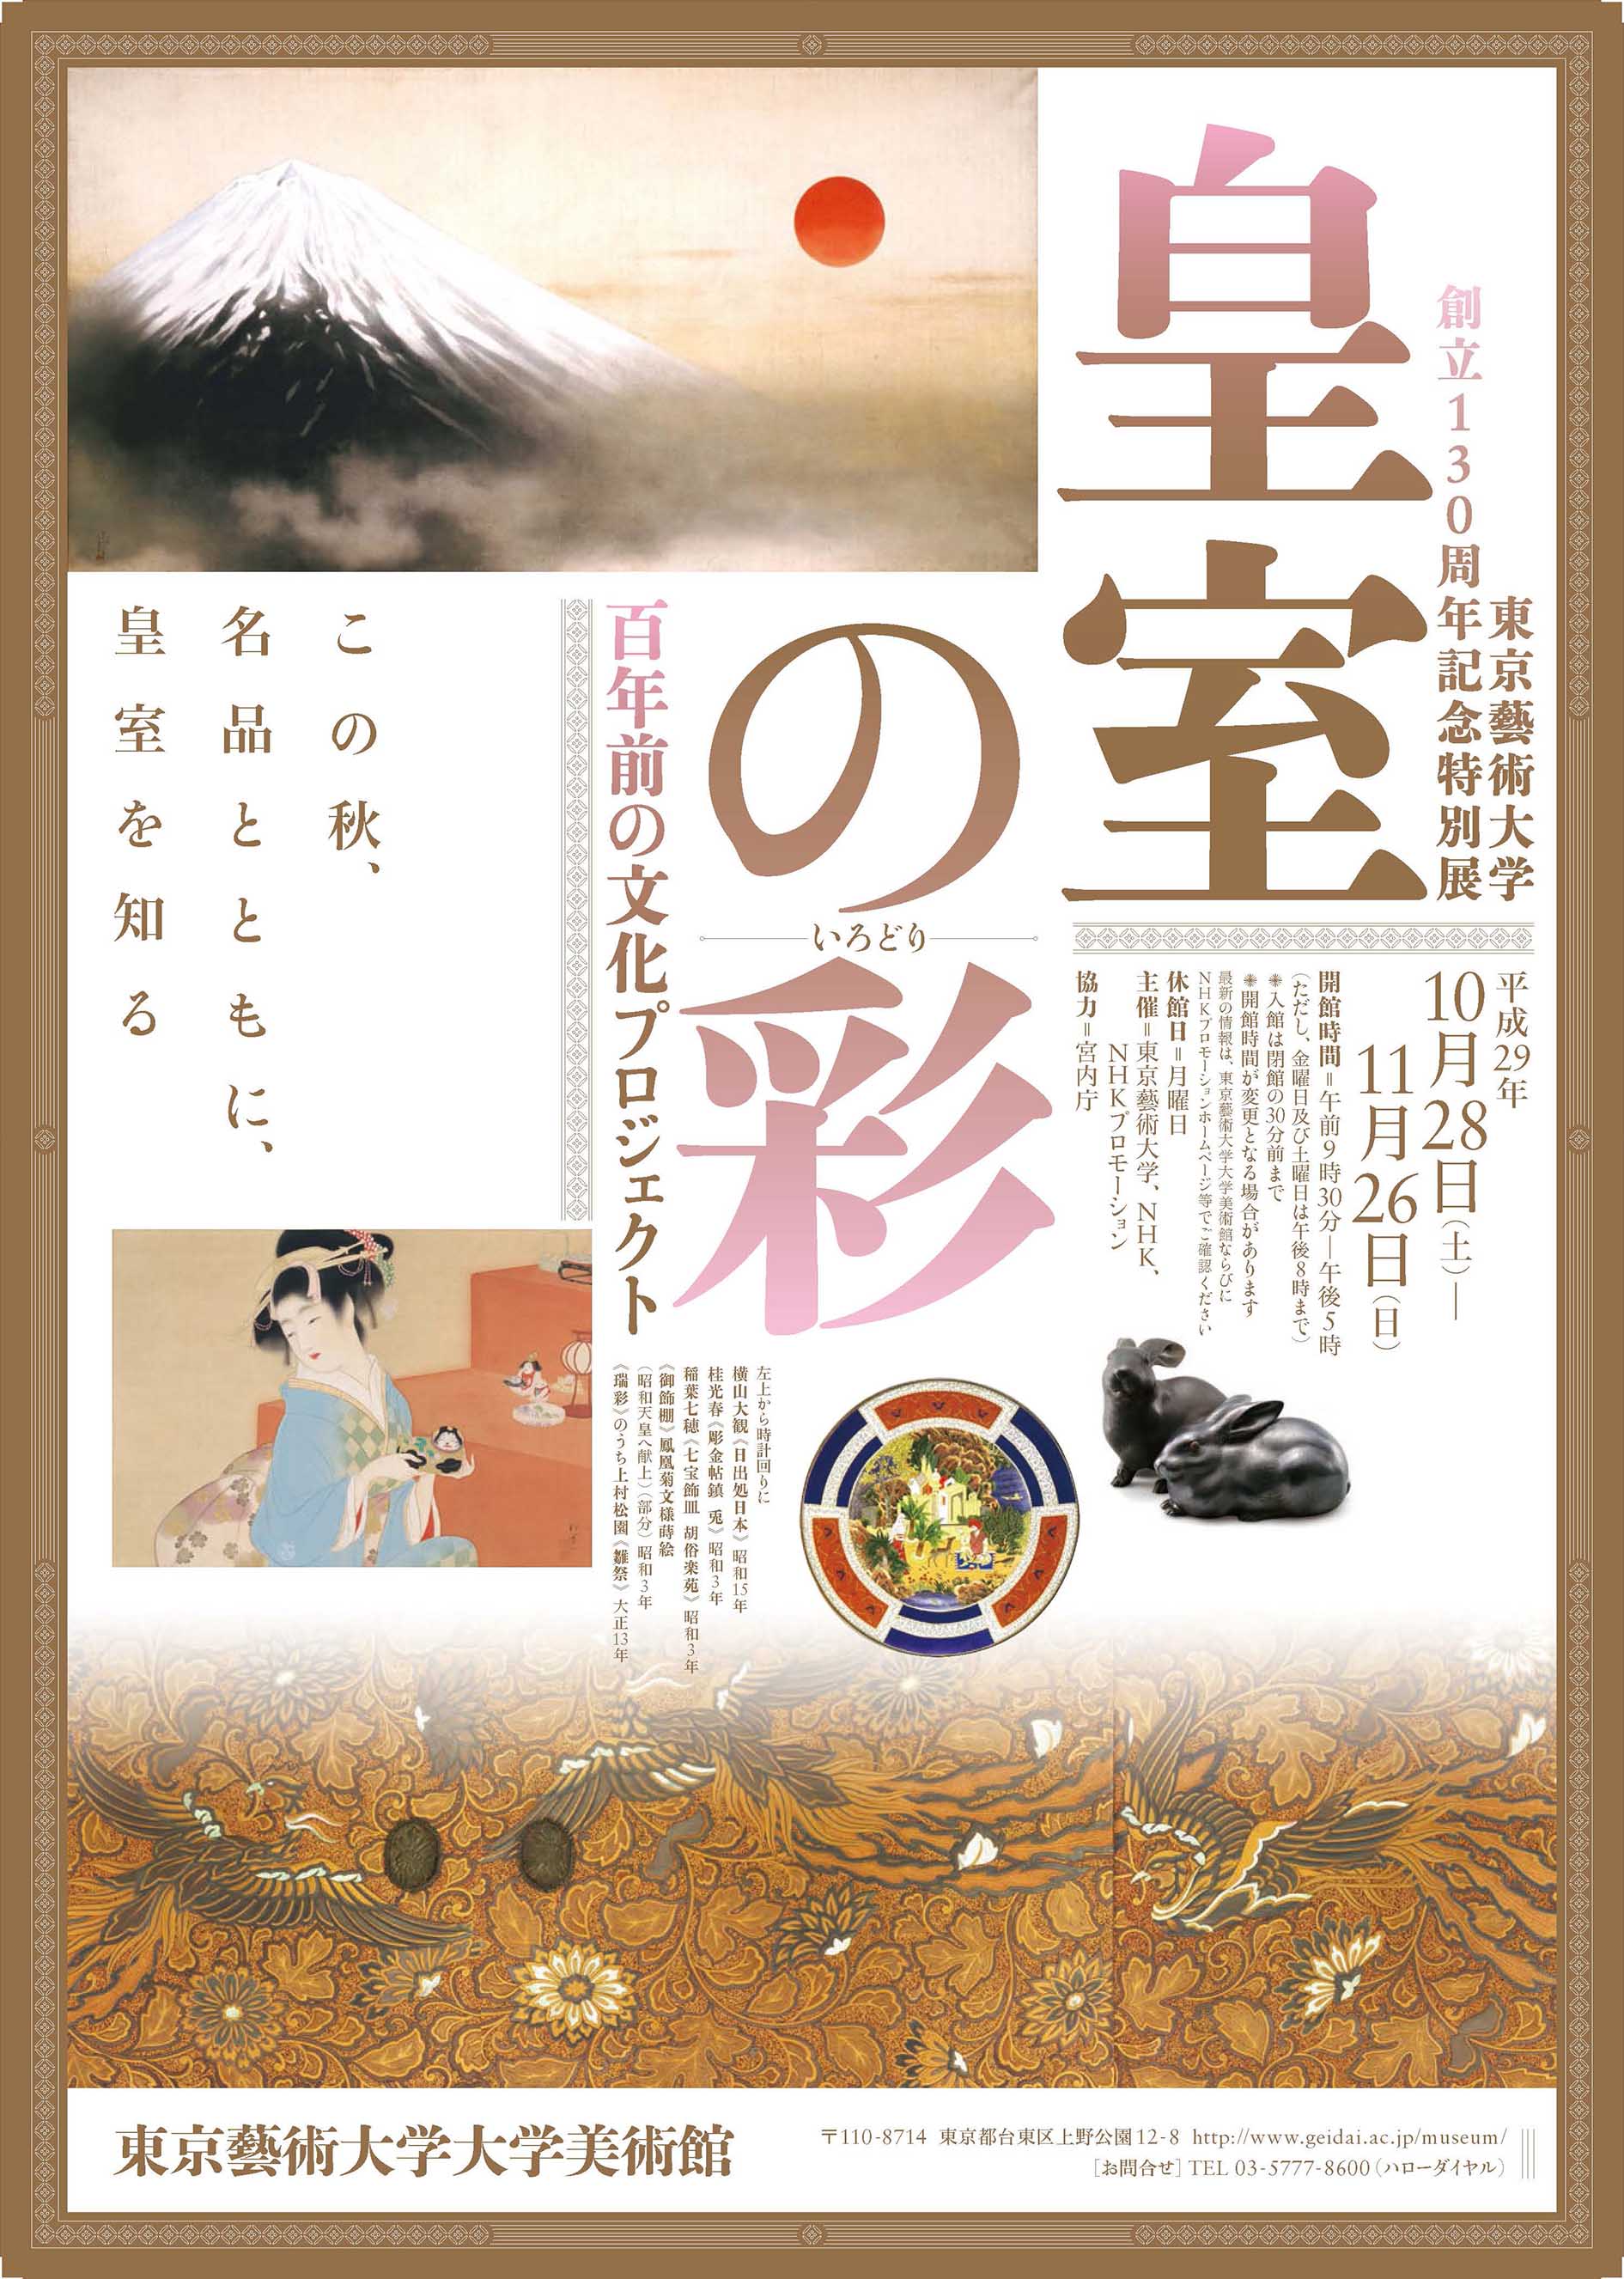 Art Treasures of the Imperial Court Produced by the Tokyo Fine Arts School During the Early 20th Century
